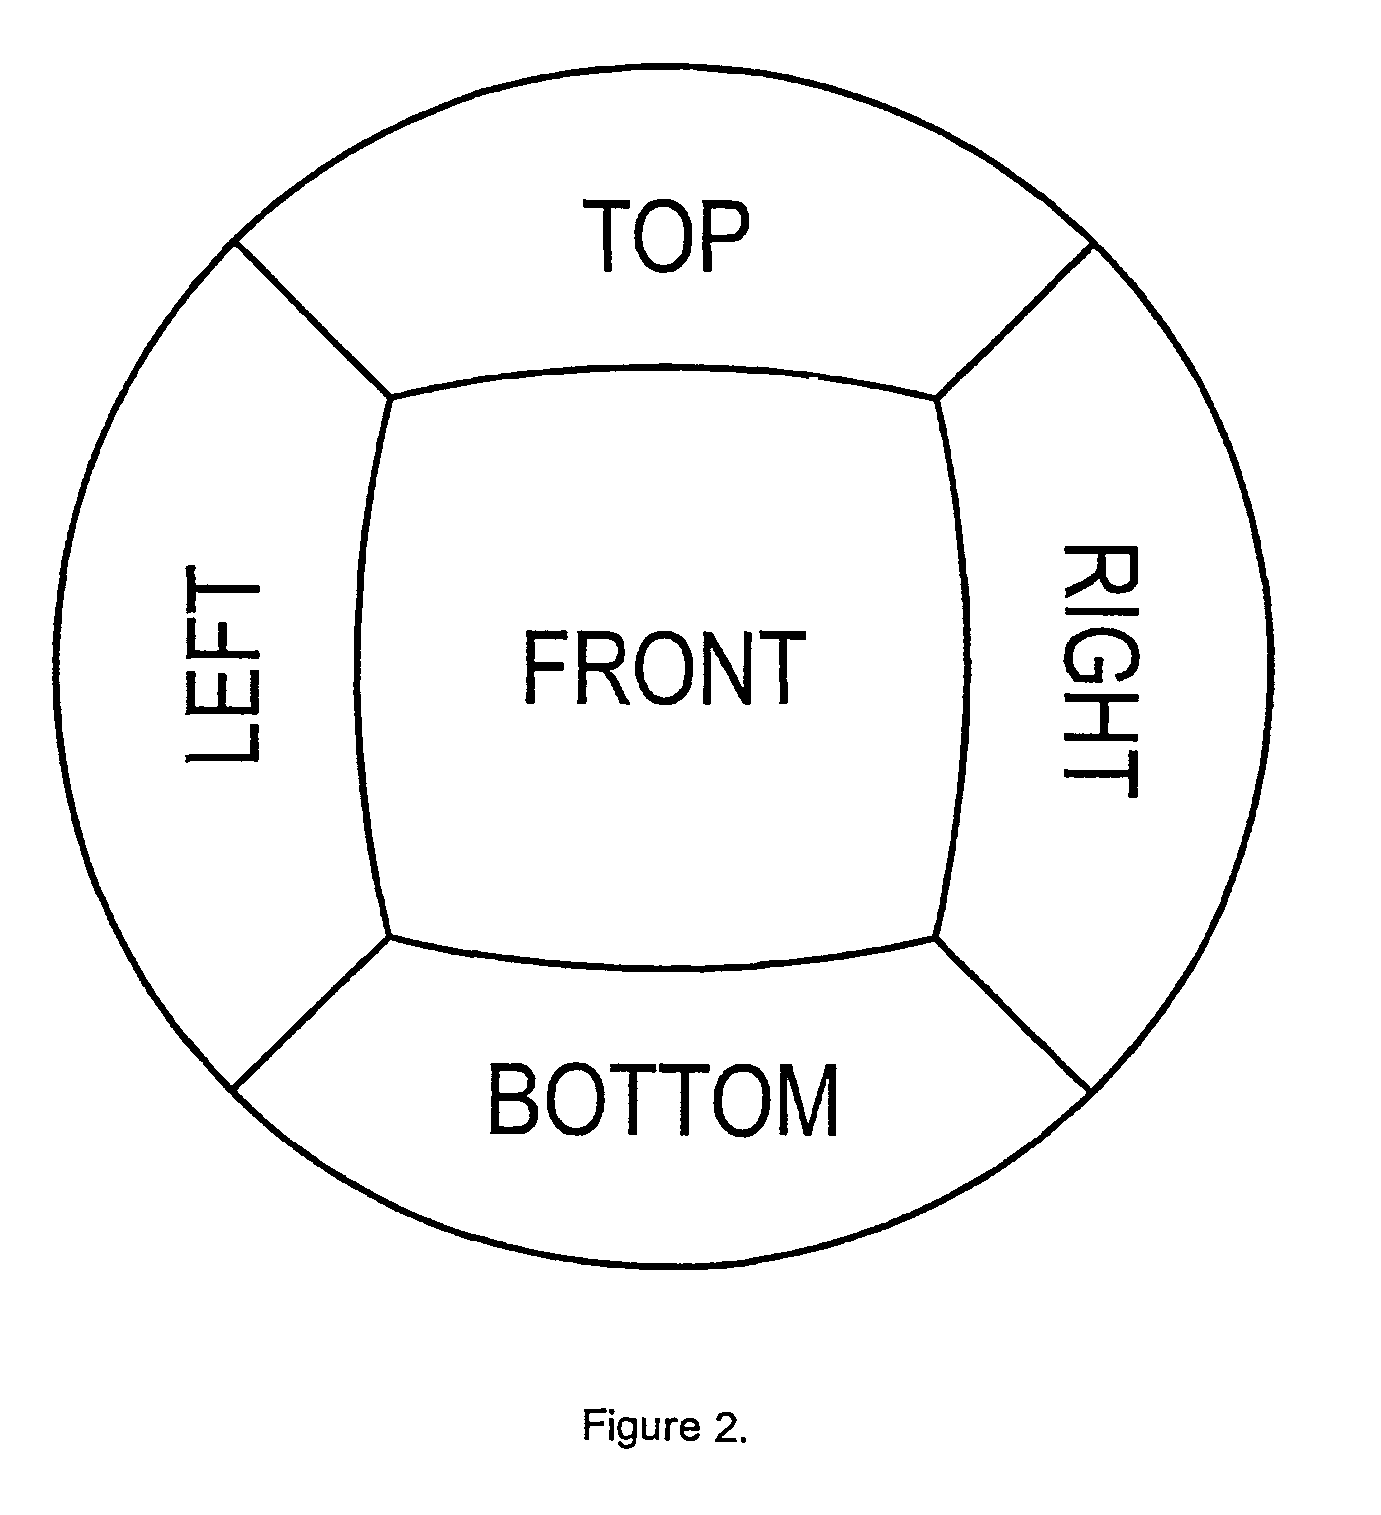 System and method for registration of cubic fisheye hemispherical images